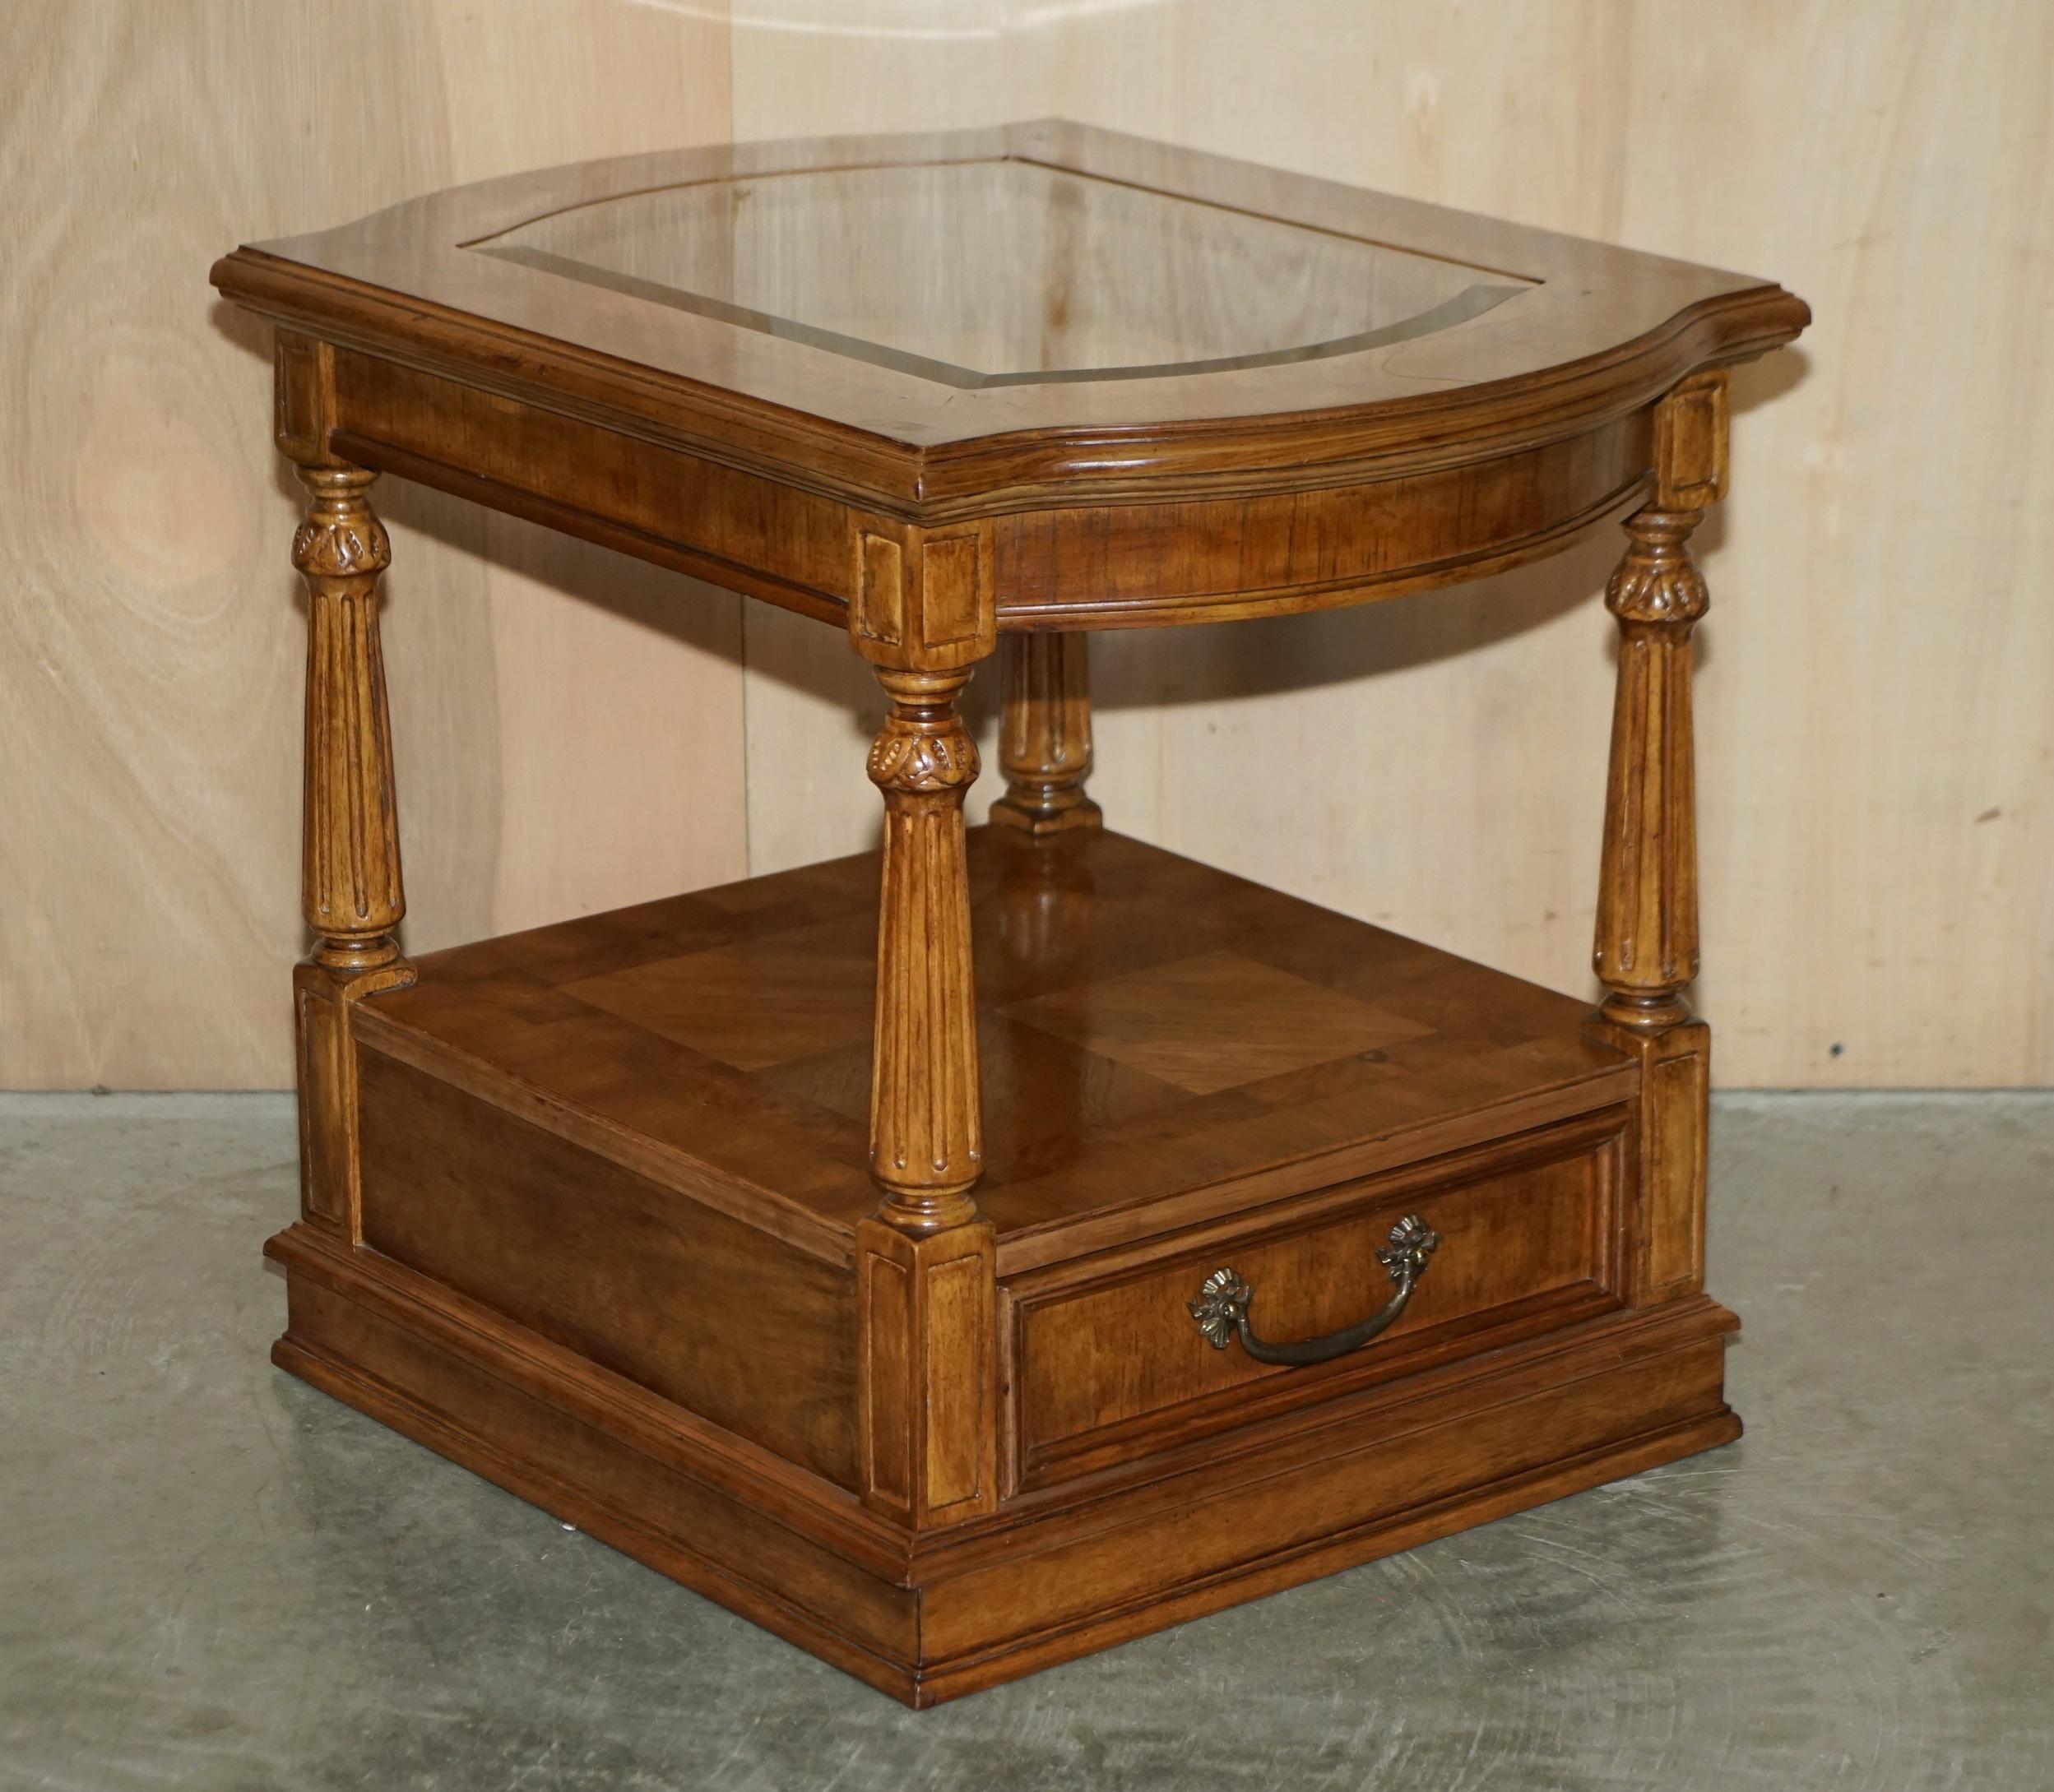 We are delighted to offer for sale this stunning pair of glass topped burr walnut single drawer side tables 

I have the matching large coffee table listed under my other items as well

A good looking well made and decorative pair, the timber